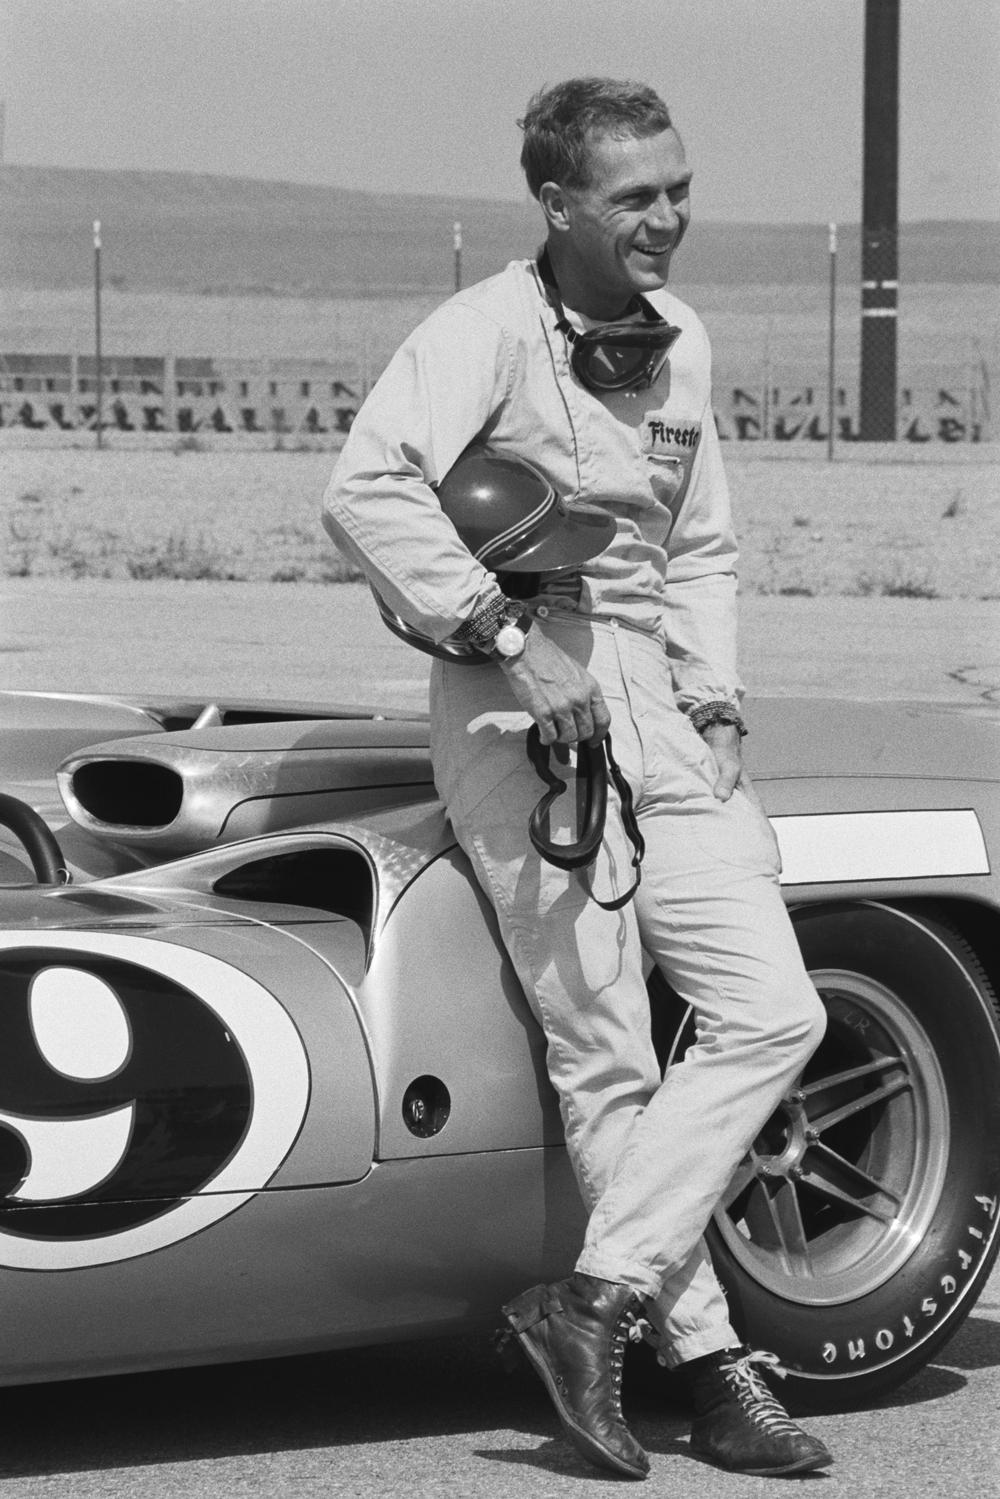 Steve McQueen in racing attire leaning against a race car